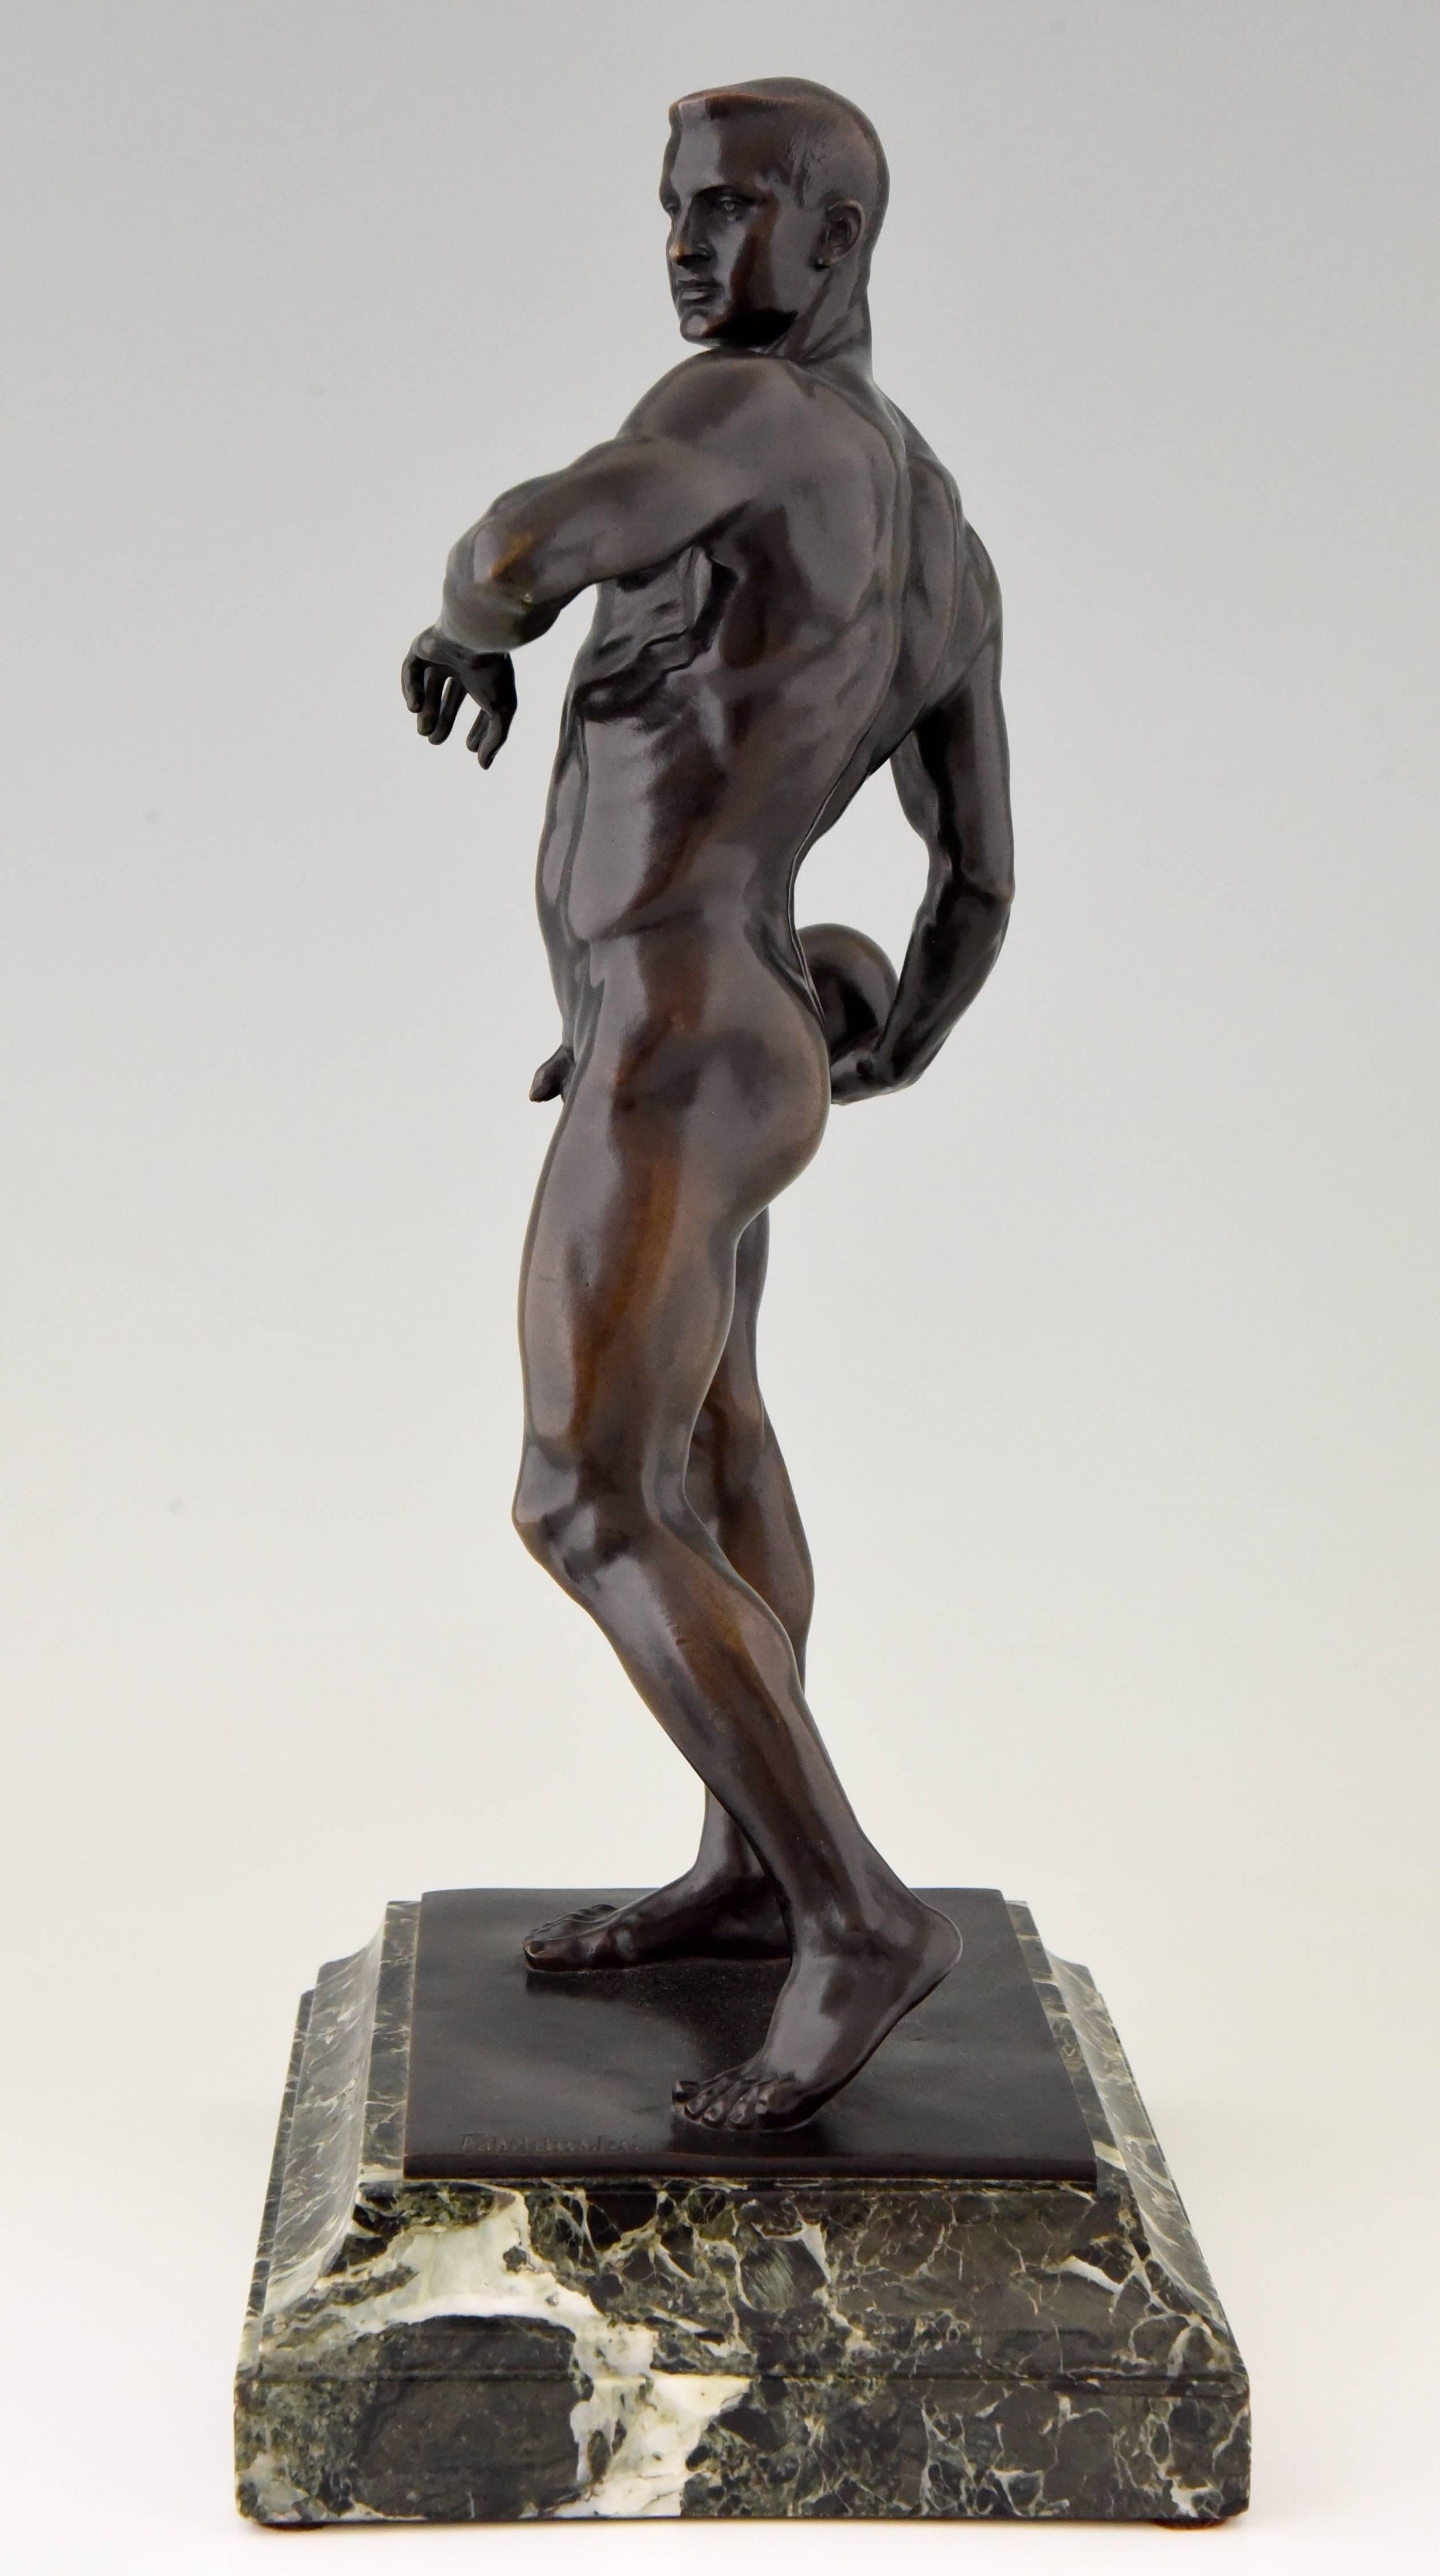 Romantic Antique Bronze Sculpture of a Male Nude, Athlete with Ball by Fabricius, 1904